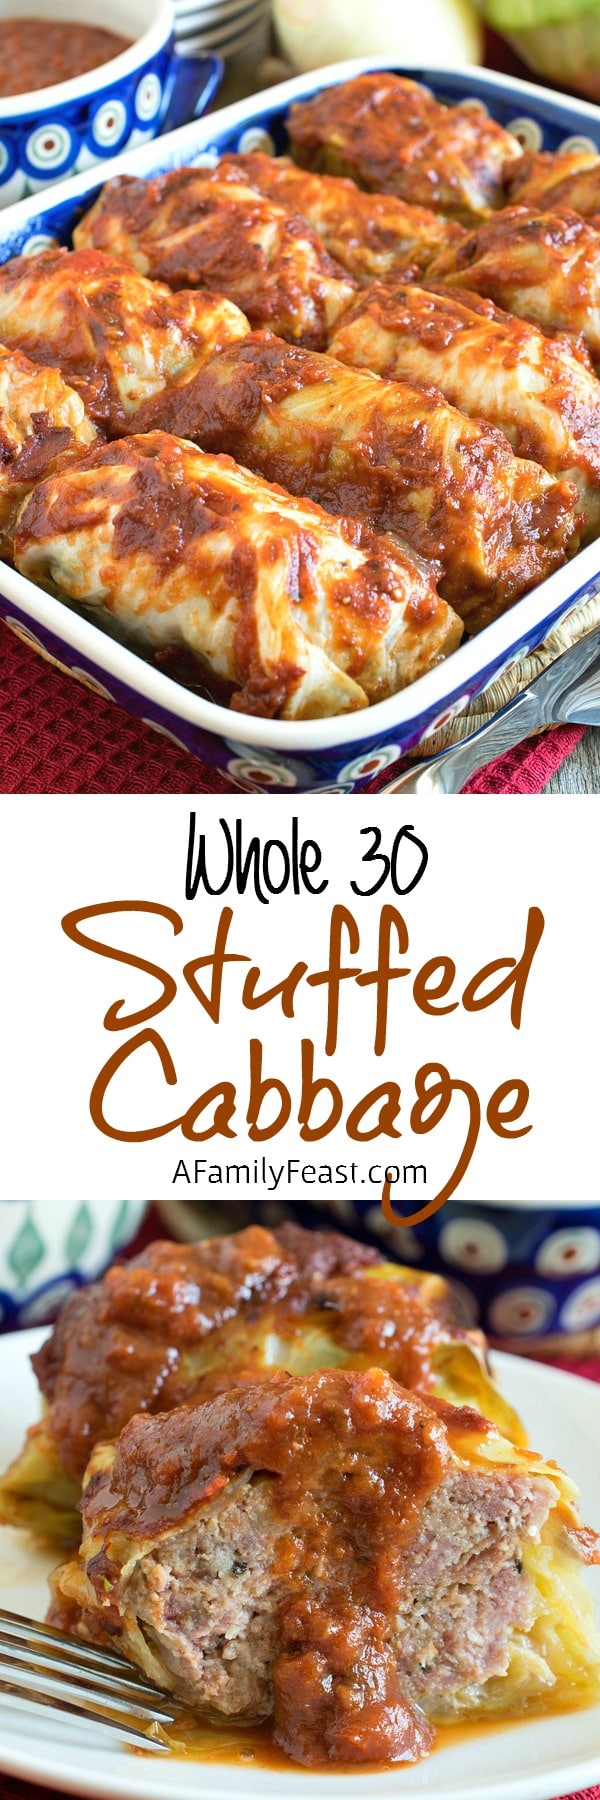 Whole30 Stuffed Cabbage - A delicious stuffed cabbage recipe anyone would love whether you are on the Whole30 program or not! Fantastic flavors!